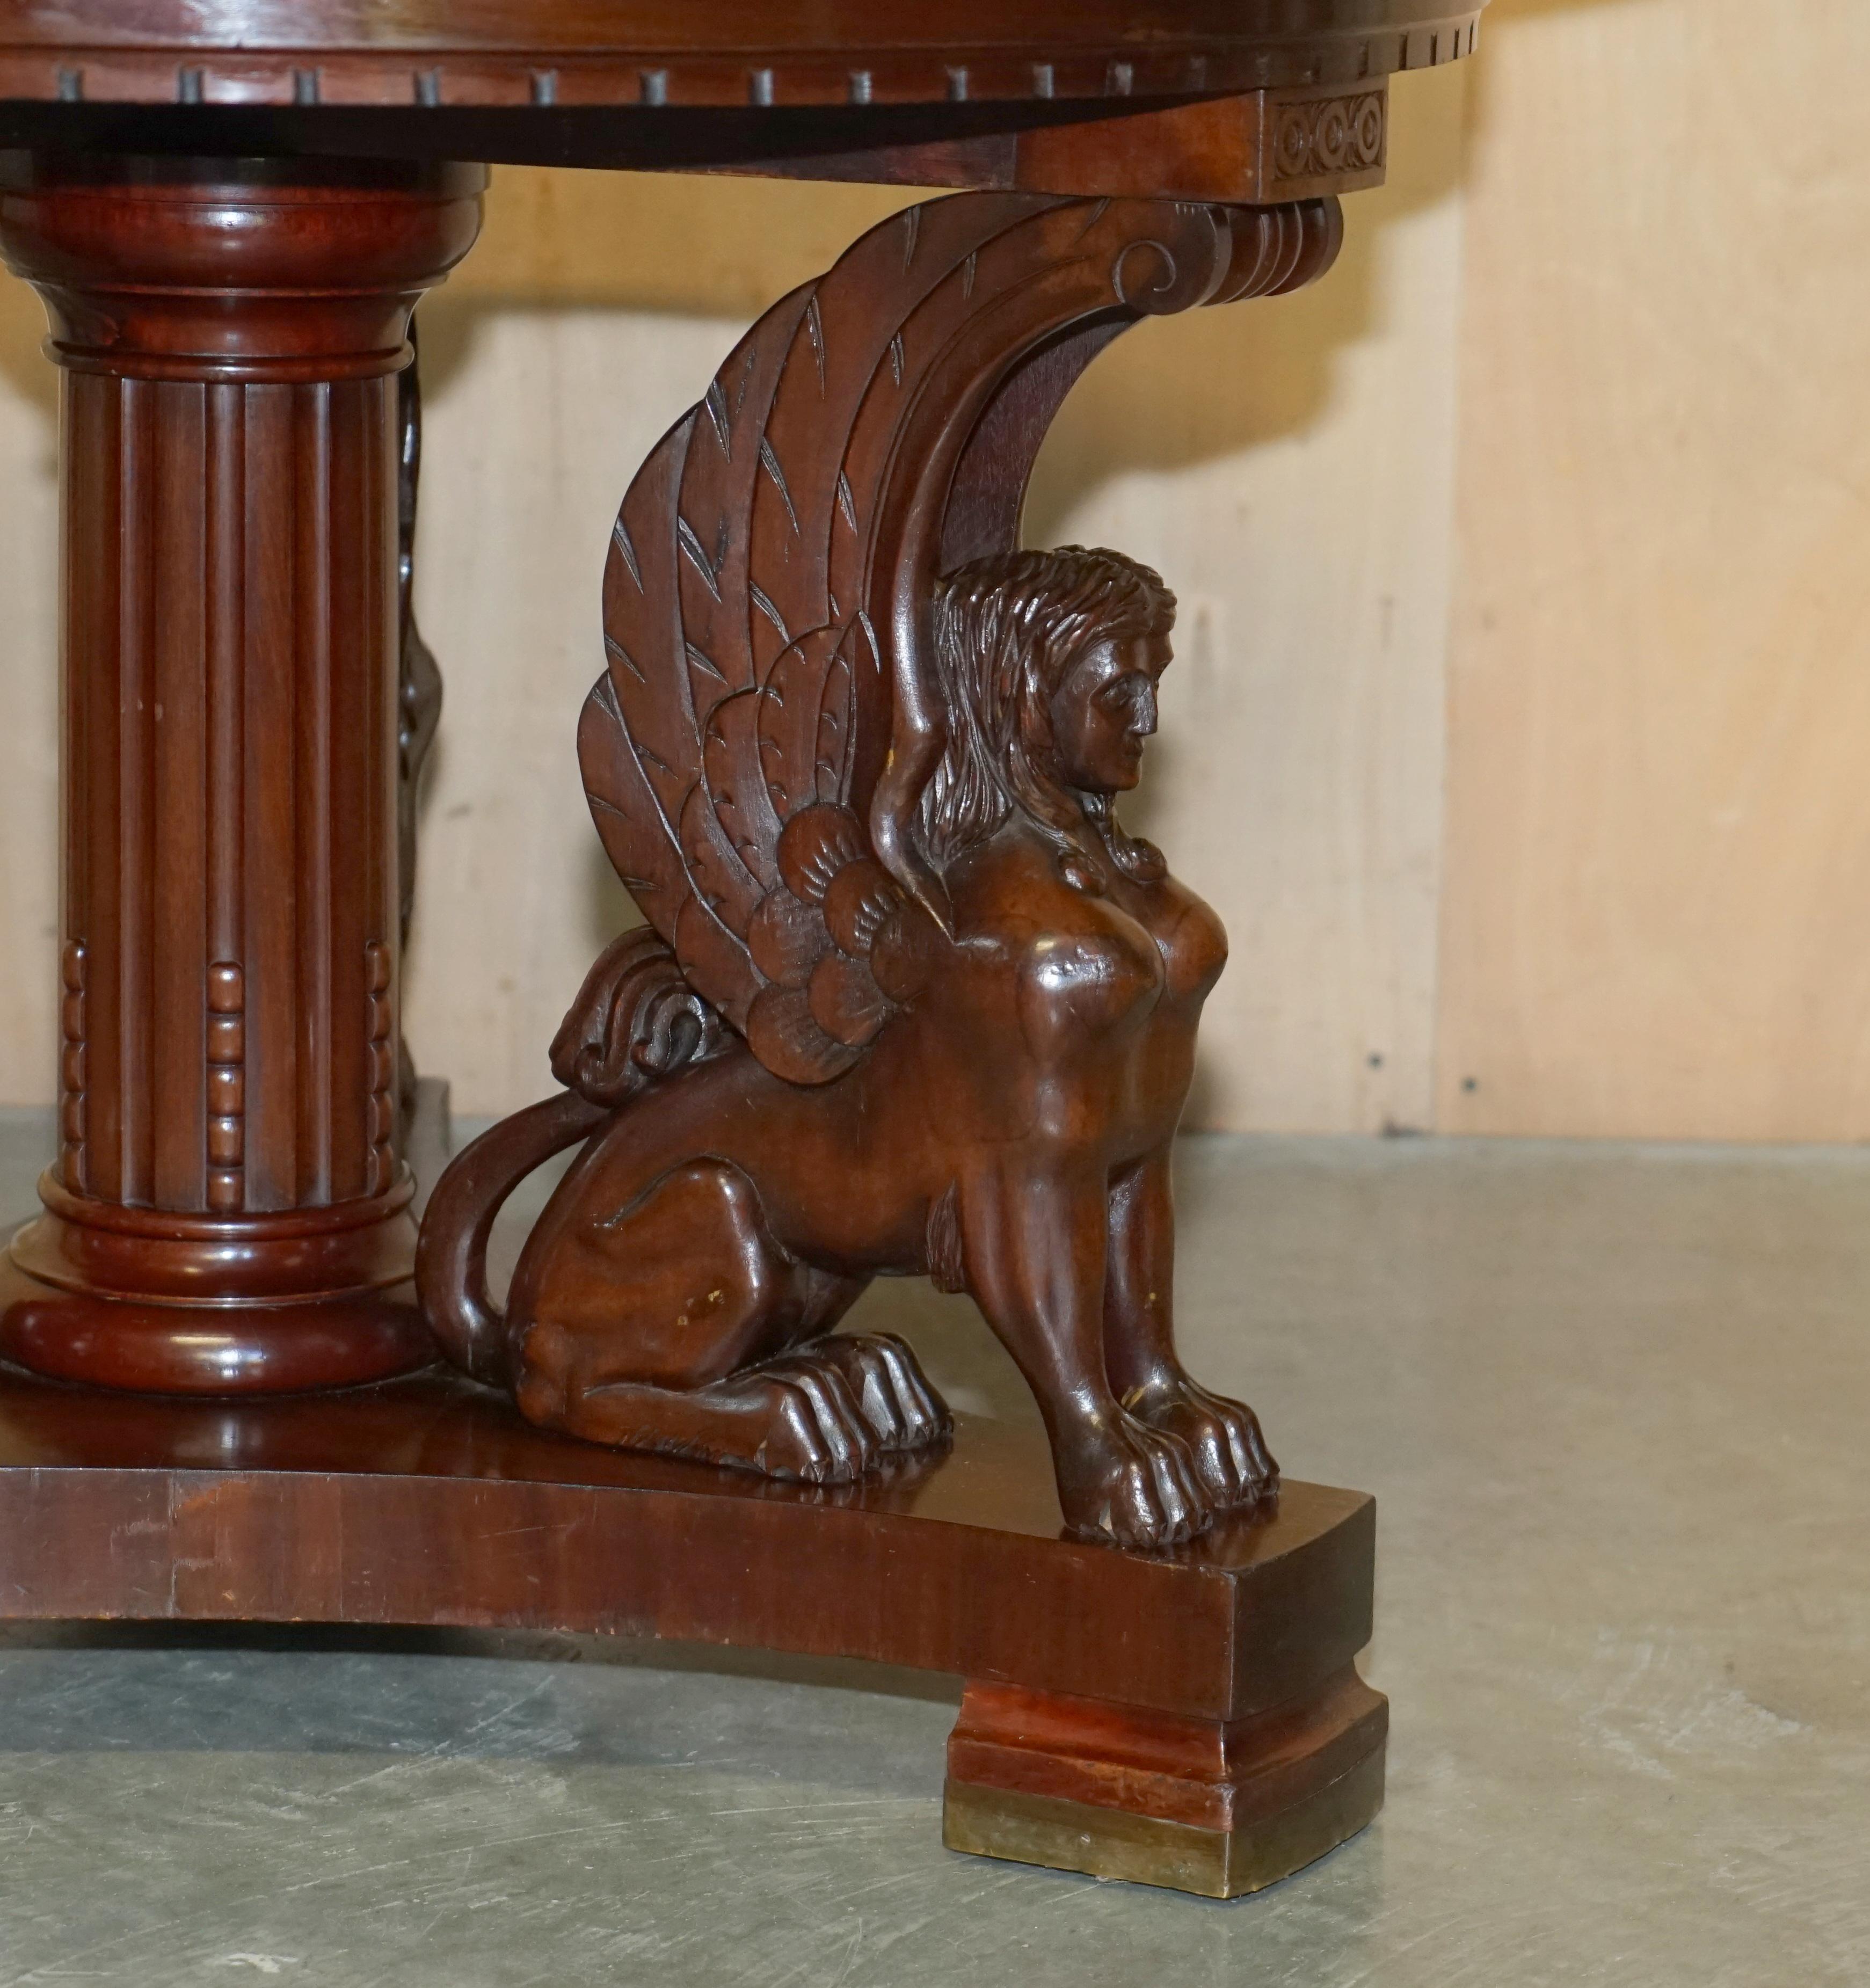 FINE ANTIQUE FRENCH NEOCLASSICAL HARDWOOD CENTRE TABLE WiTH SPHINX PILLARED BASE im Angebot 7